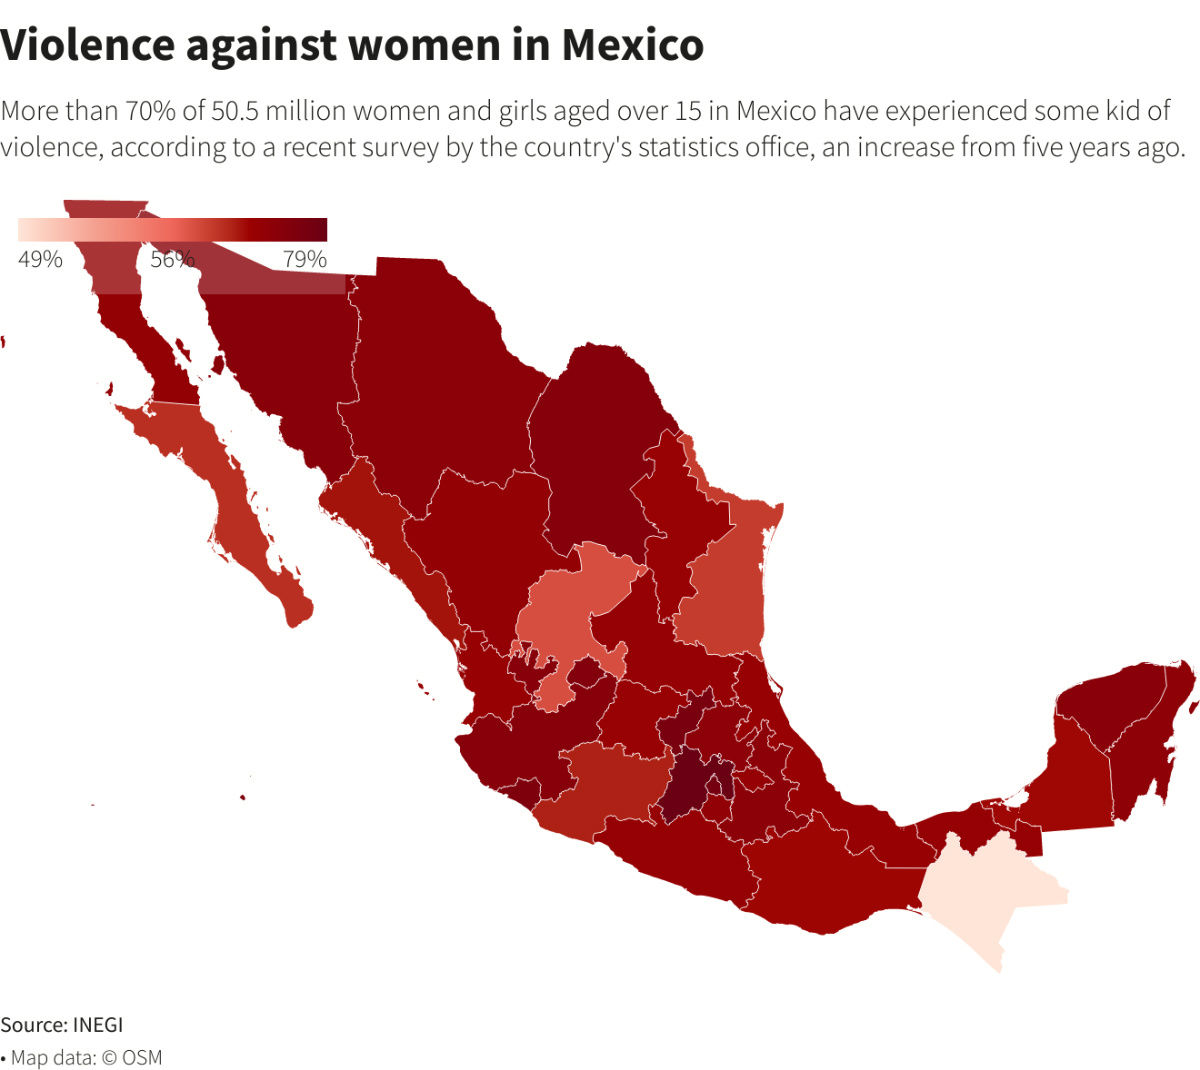 Mexico violence against women